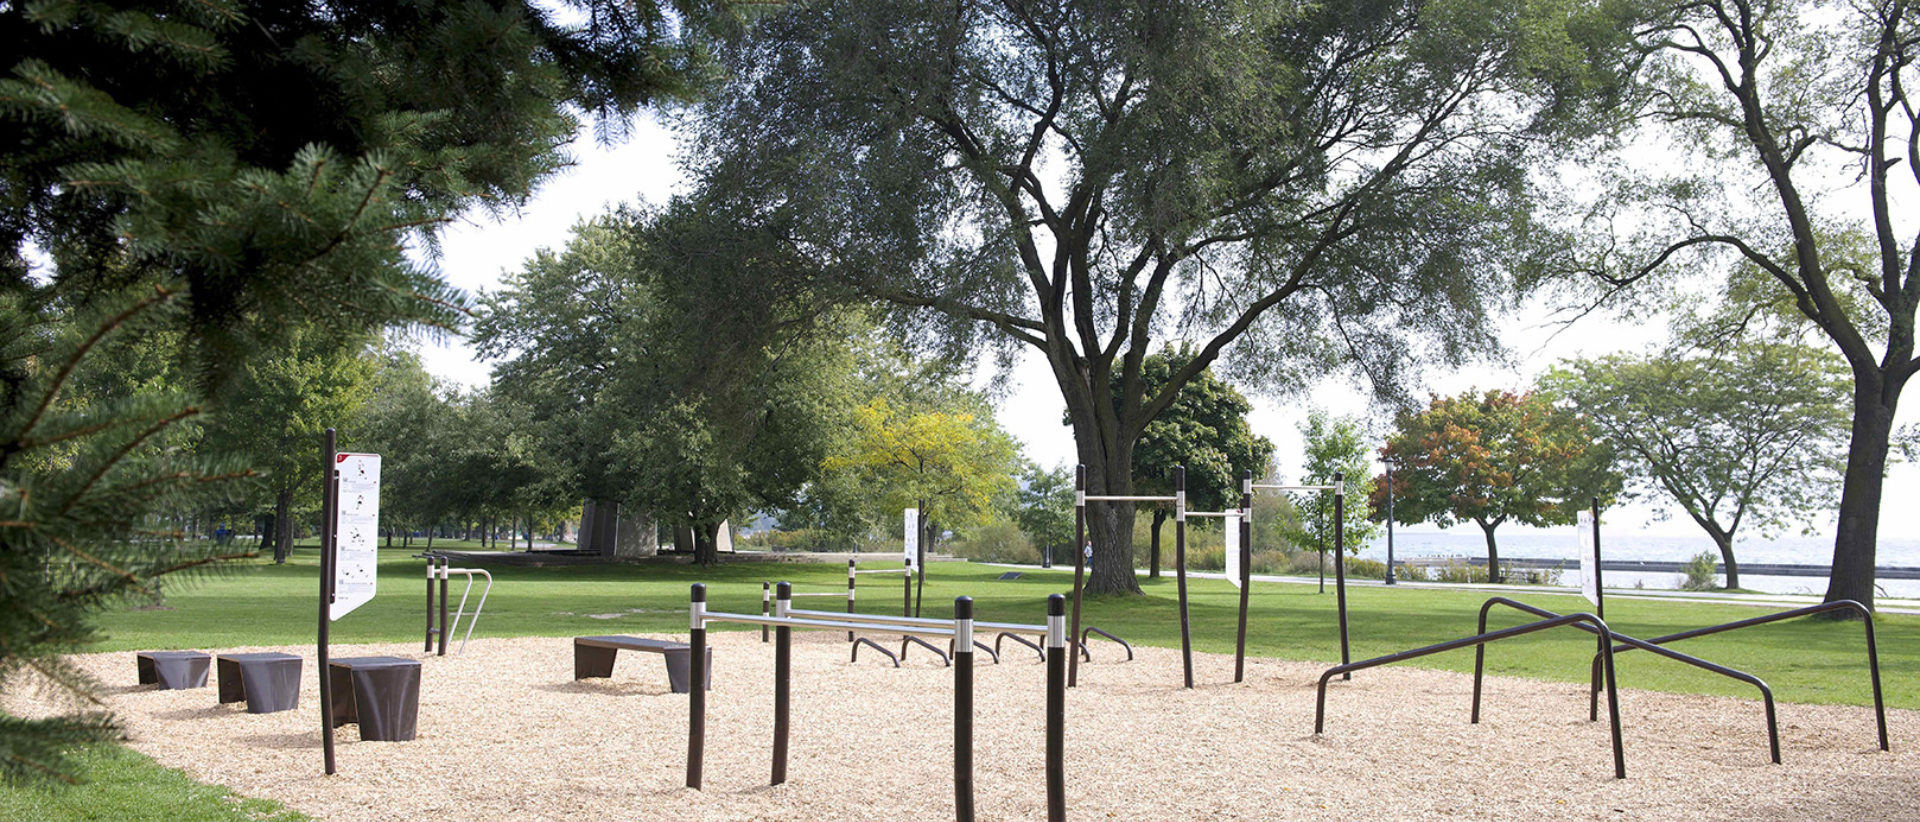 A photograph of an outdoor fitness circuit in a park, with various fitness equipment, including parallel bars, a long bench, step up benches and hurdles.